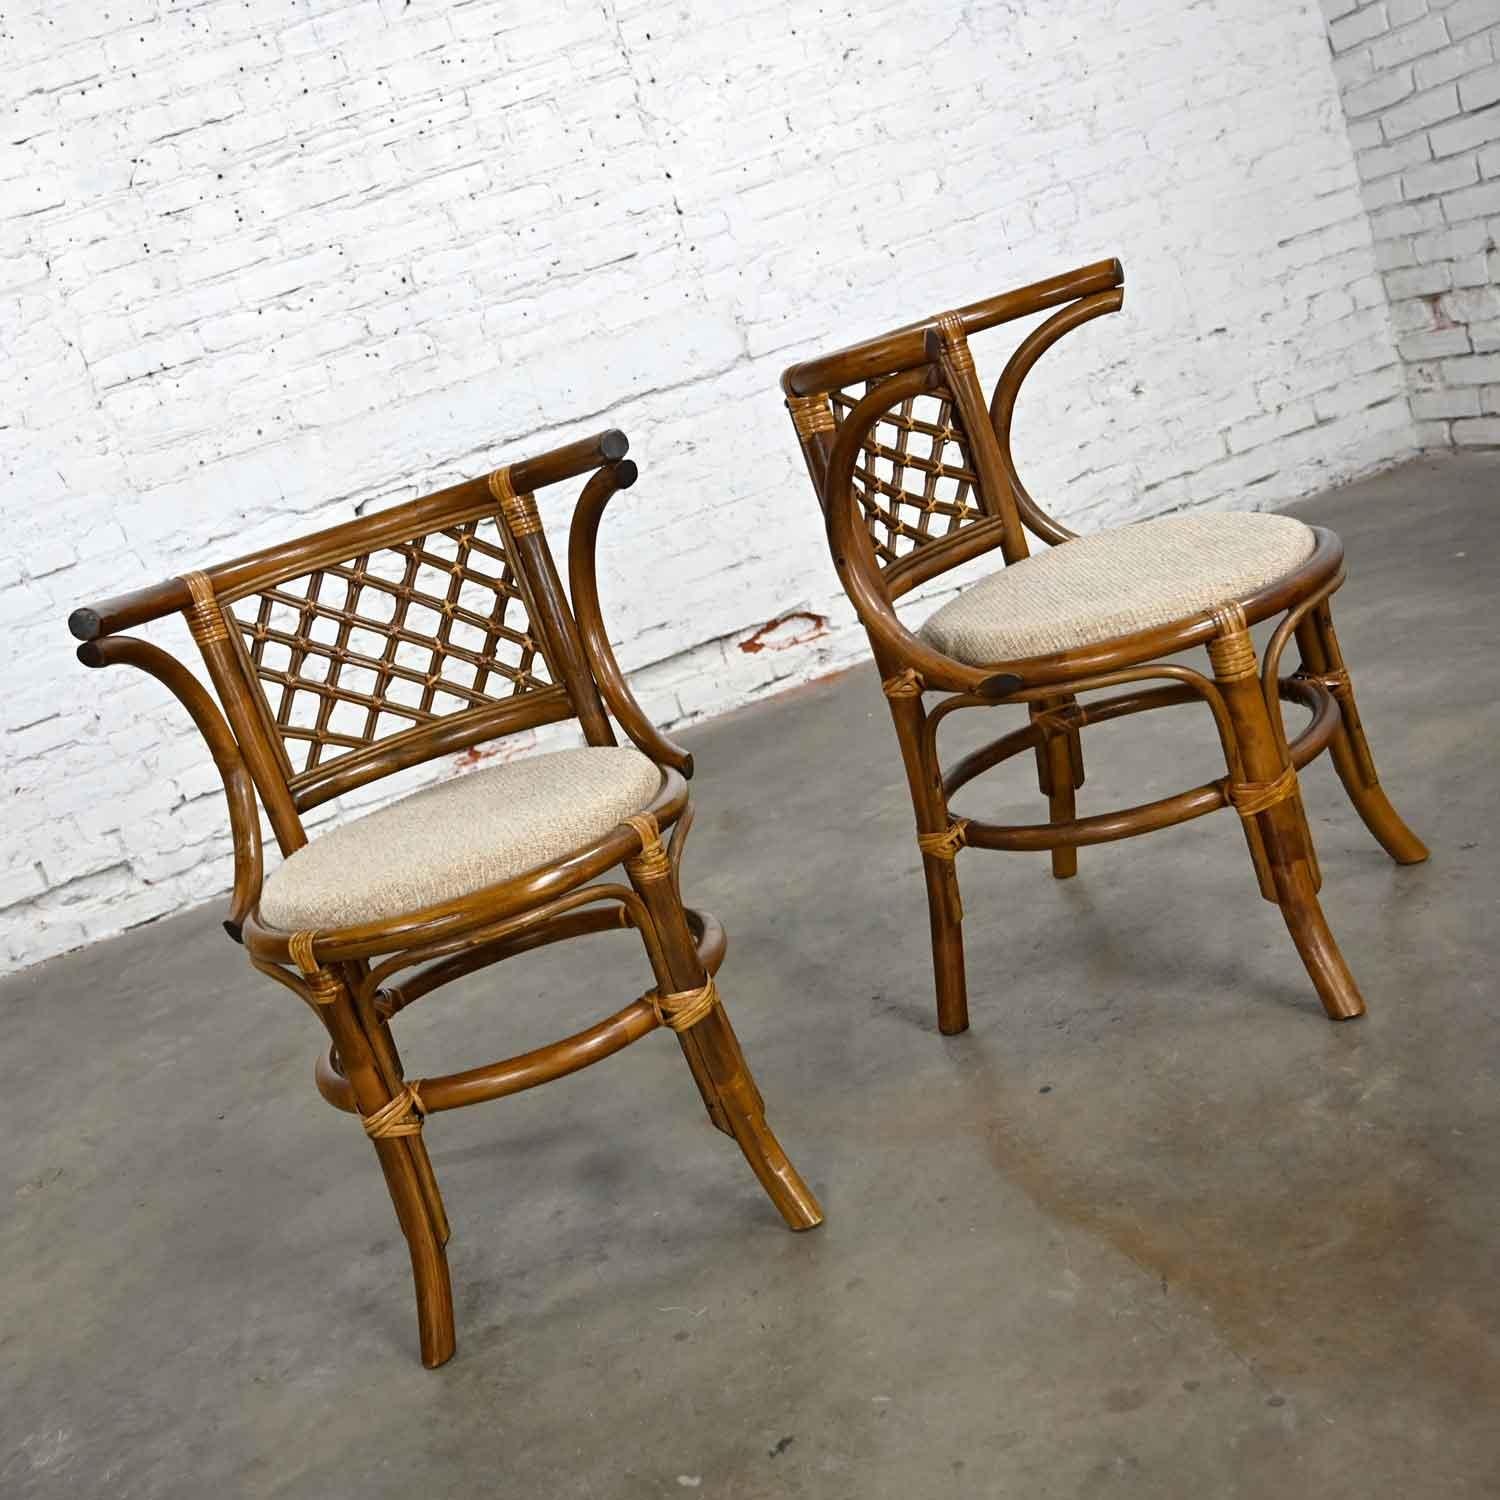 Vintage Rattan & Cane Pair of Side Chairs Woven Diamond Yoke Back Off-White Twee 2